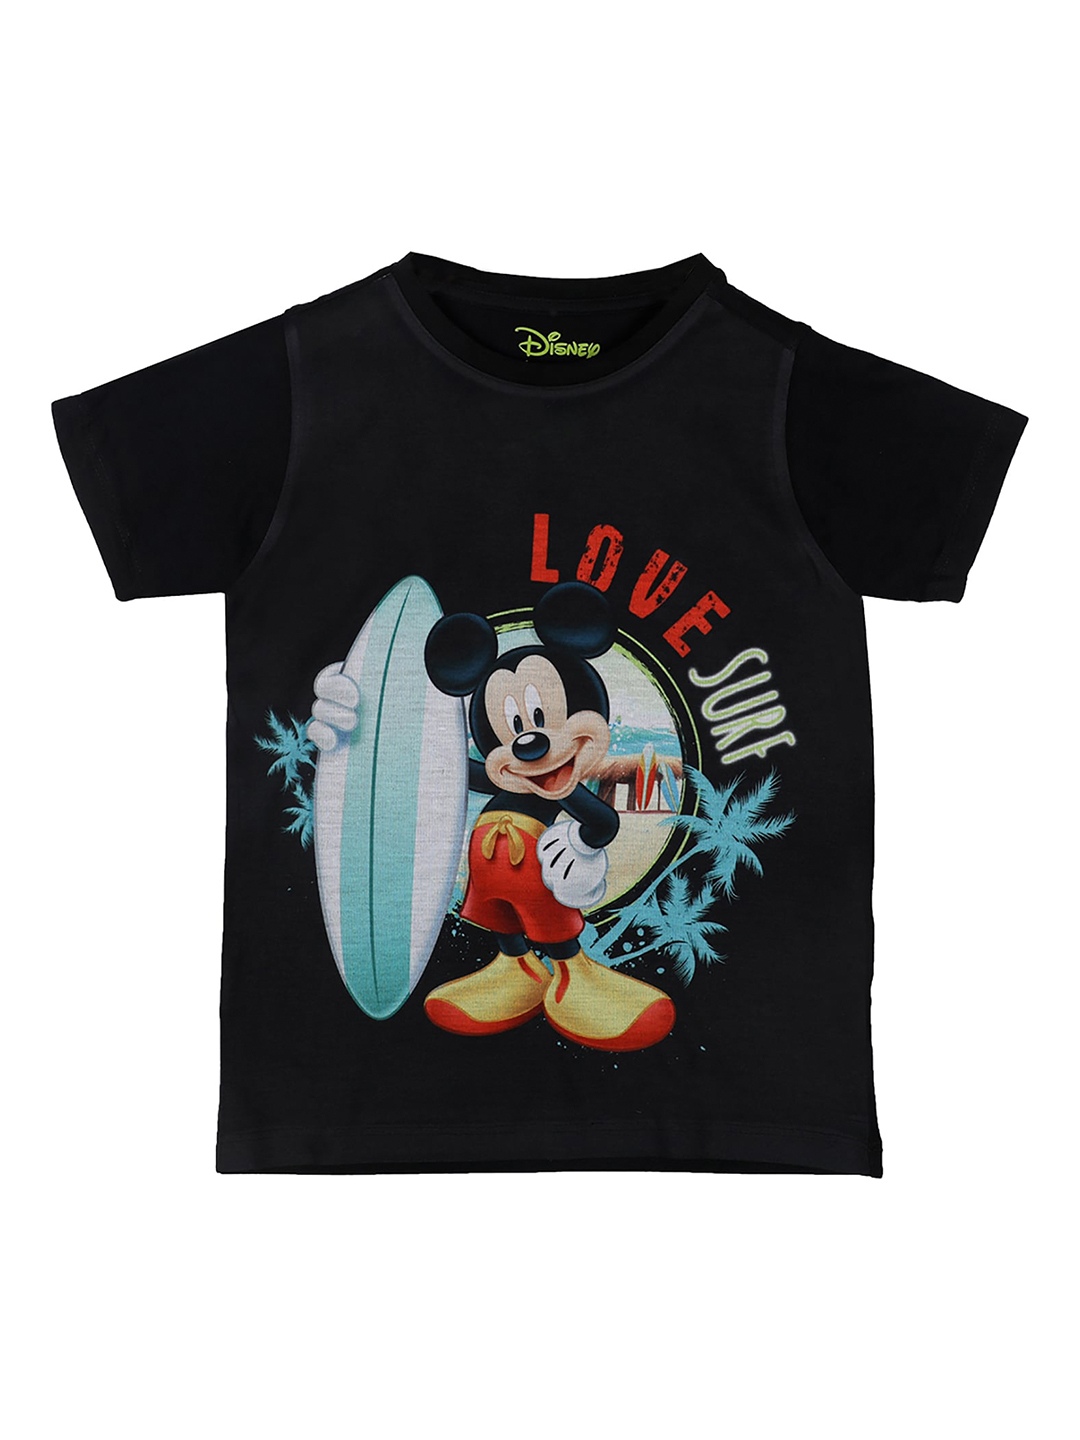 

Disney by Wear Your Mind Boys Black & Blue Mickey Mouse Printed T-shirt